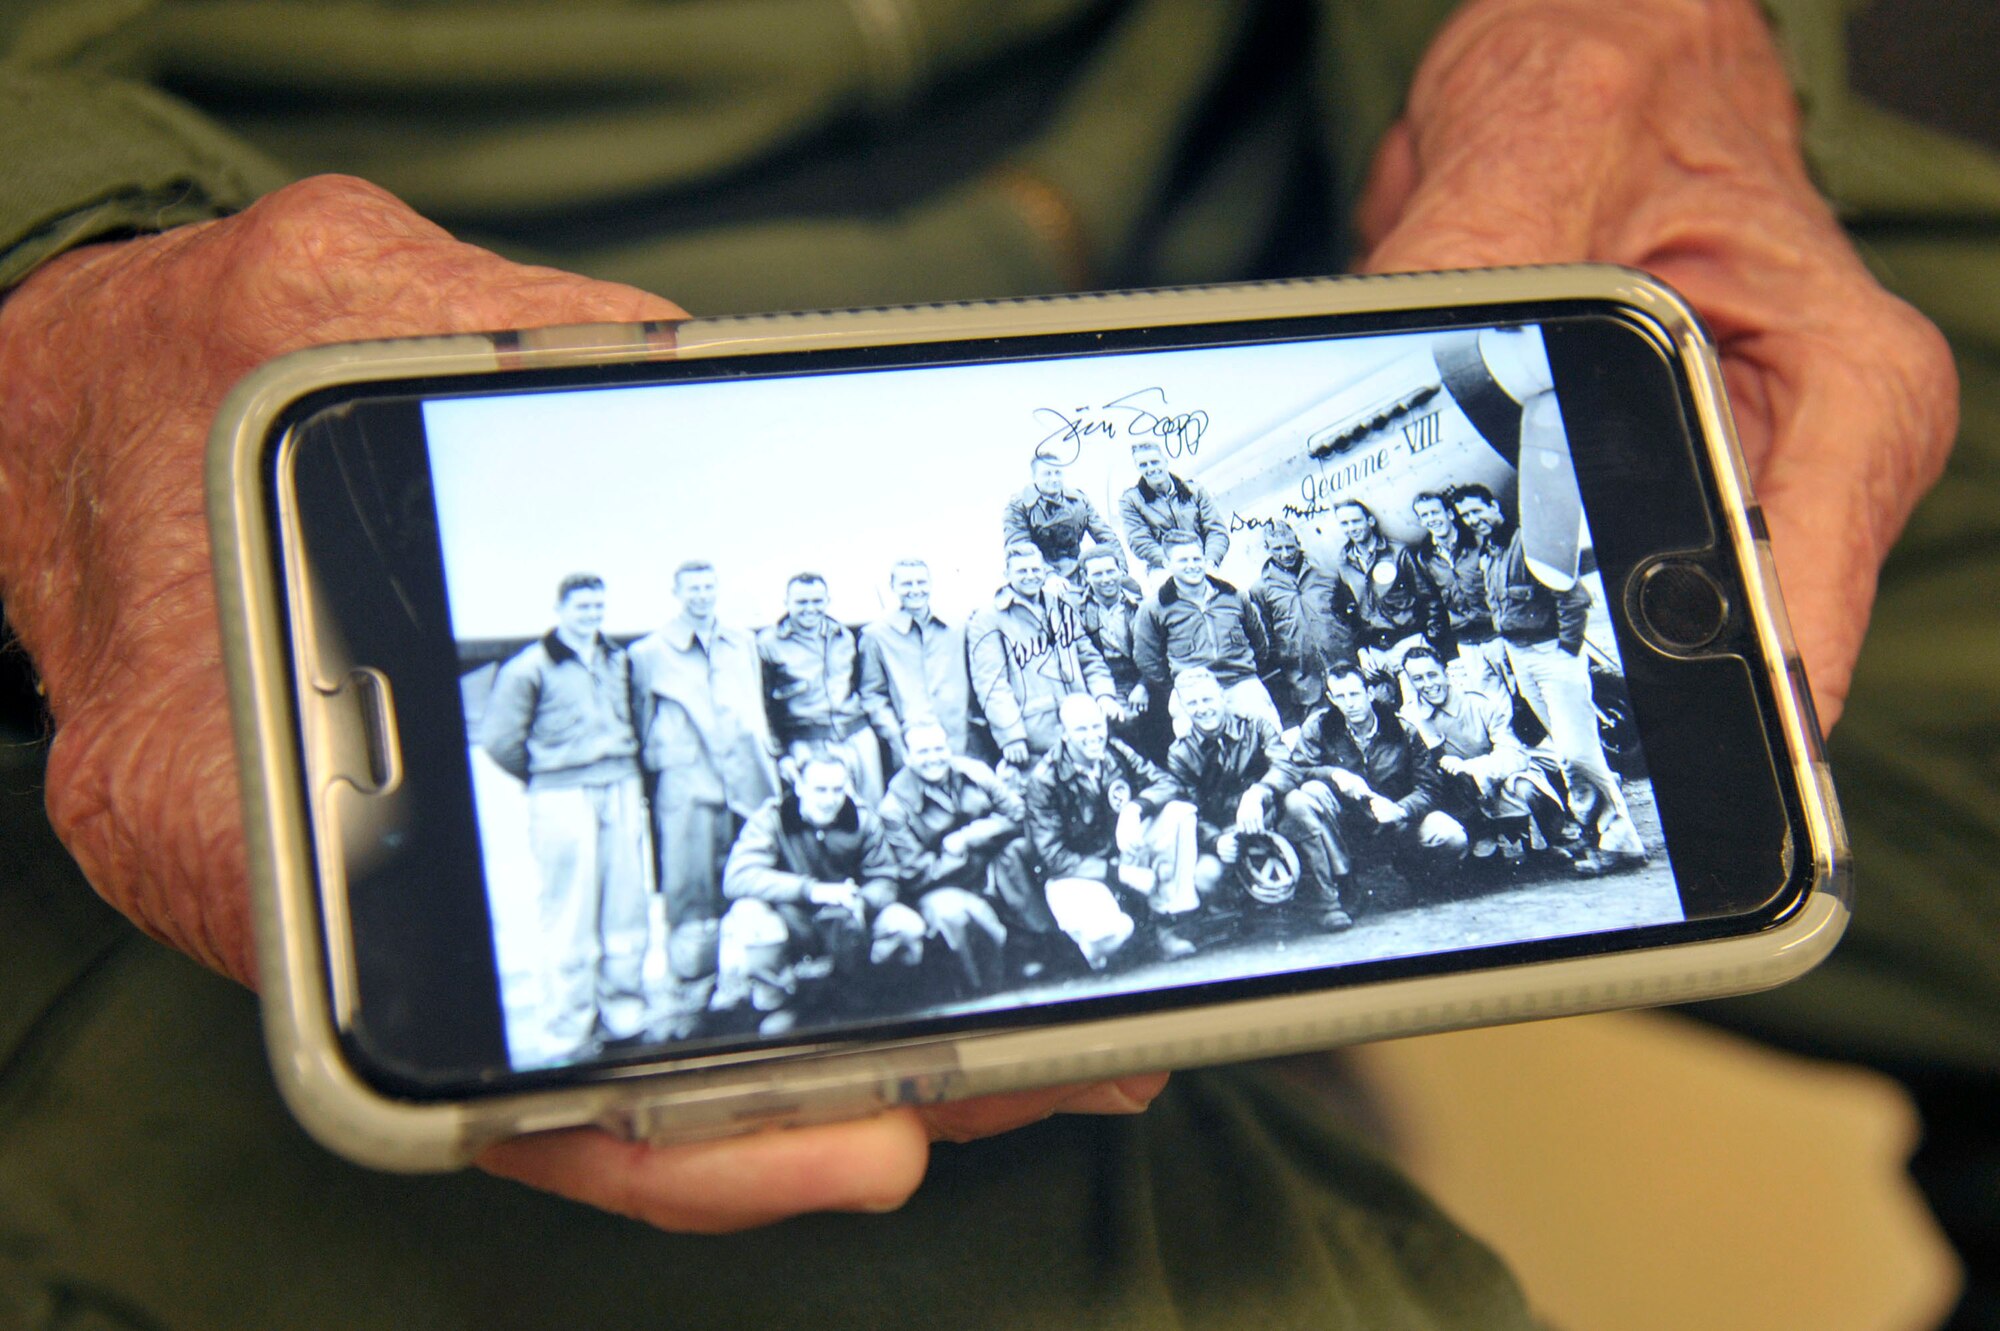 Capt. Jerry Yellin, a former U.S. Army Air Corps fighter pilot, shows a photo taken in 1944 toward the end of World War II, of the 78th Fighter Squadron "Bushmasters," during his visit to Laughlin Air Force Base, Texas, Dec. 14, 2016. Yellin enlisted two months after the bombing of Hickam Air Field and Pearl Harbor, Hawaii, on his 18th birthday. He was a part of the squadron who flew the final combat mission in the Pacific at the conclusion of World War II. (U.S. Air Force photo/Tech. Sgt. Mike Meares)